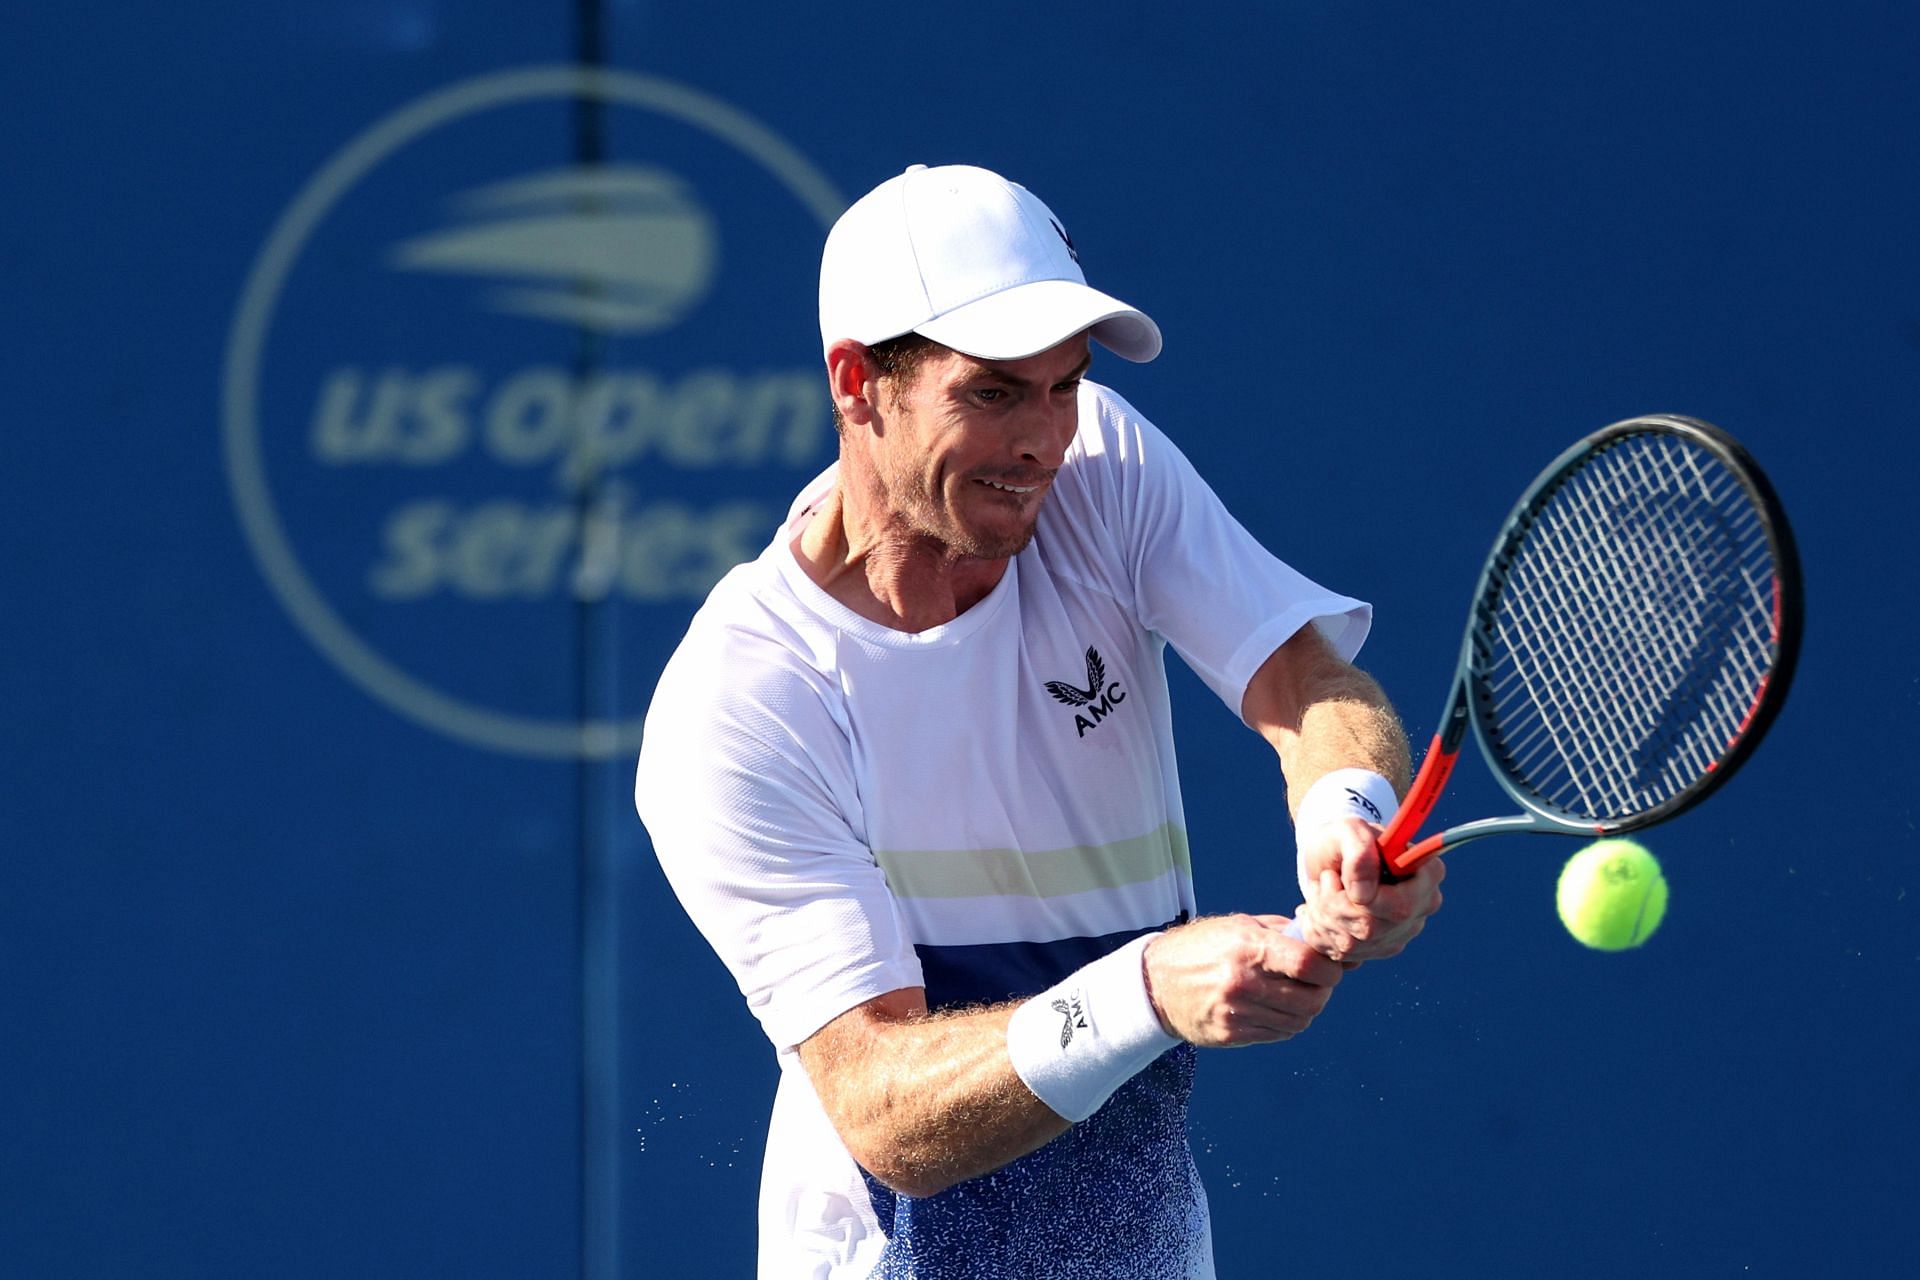 Andy Murray is through to the second round of the Cincinnati Open